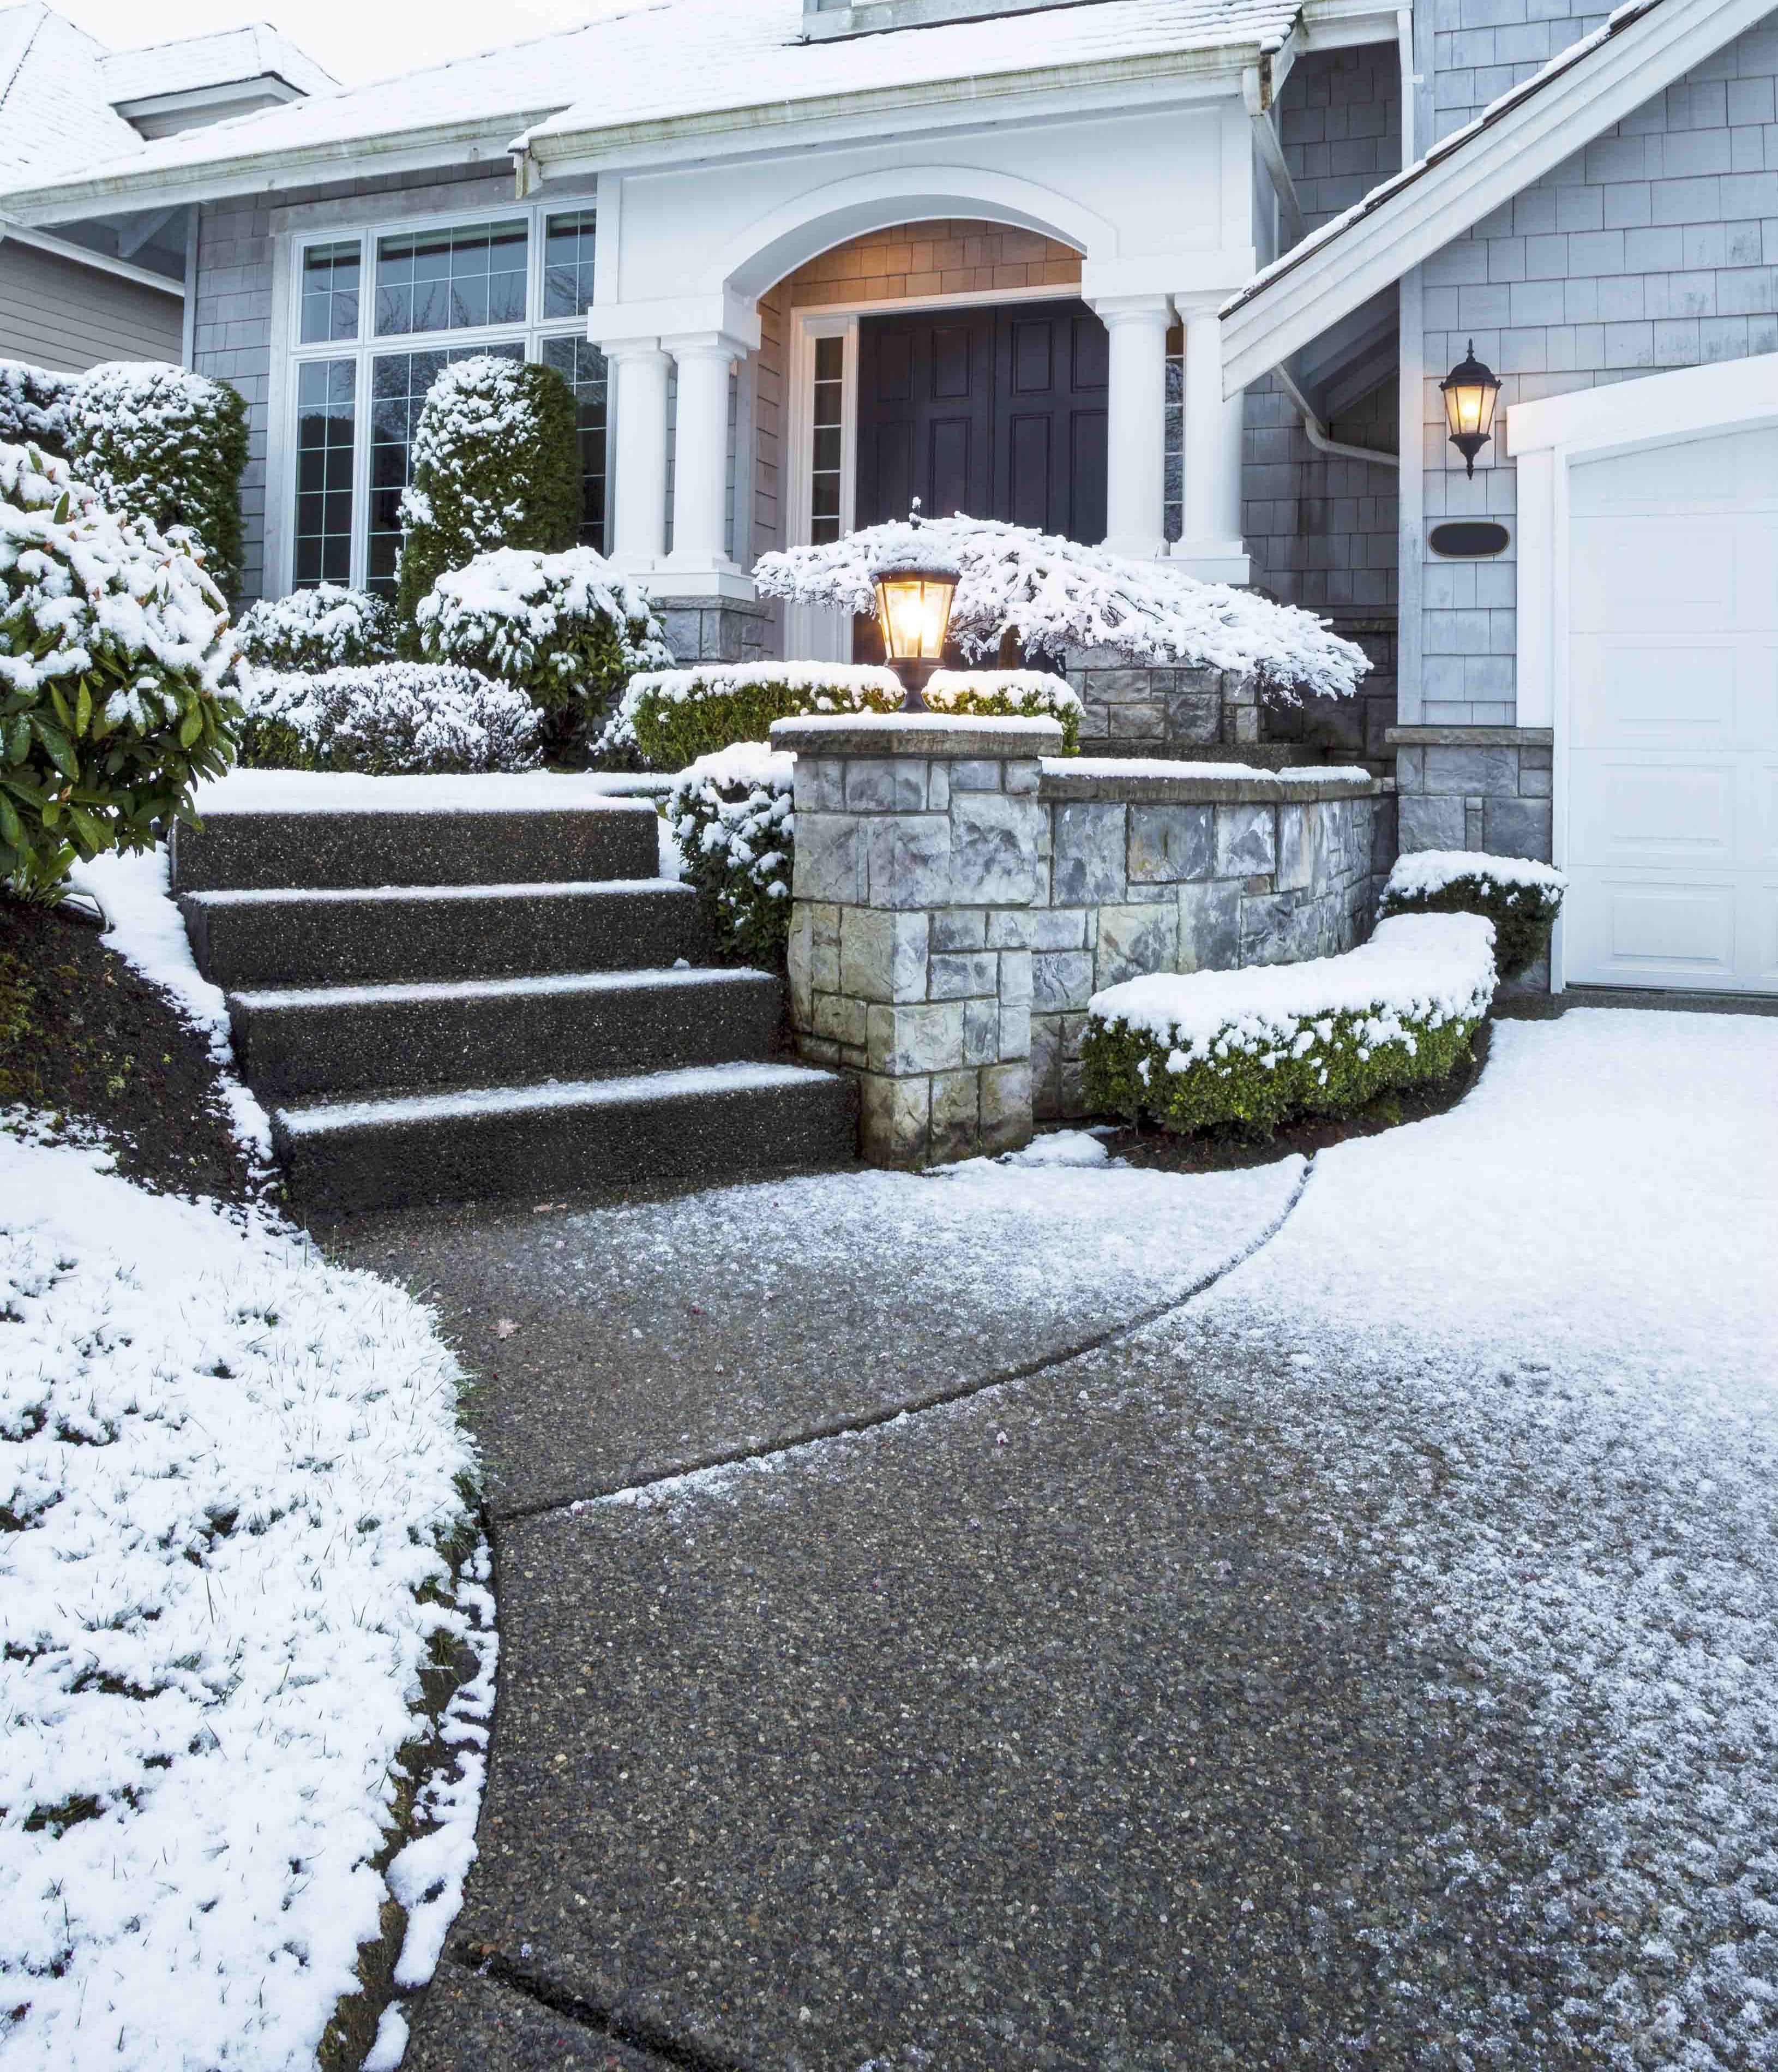 Decorative concrete stairs and driveway with snow